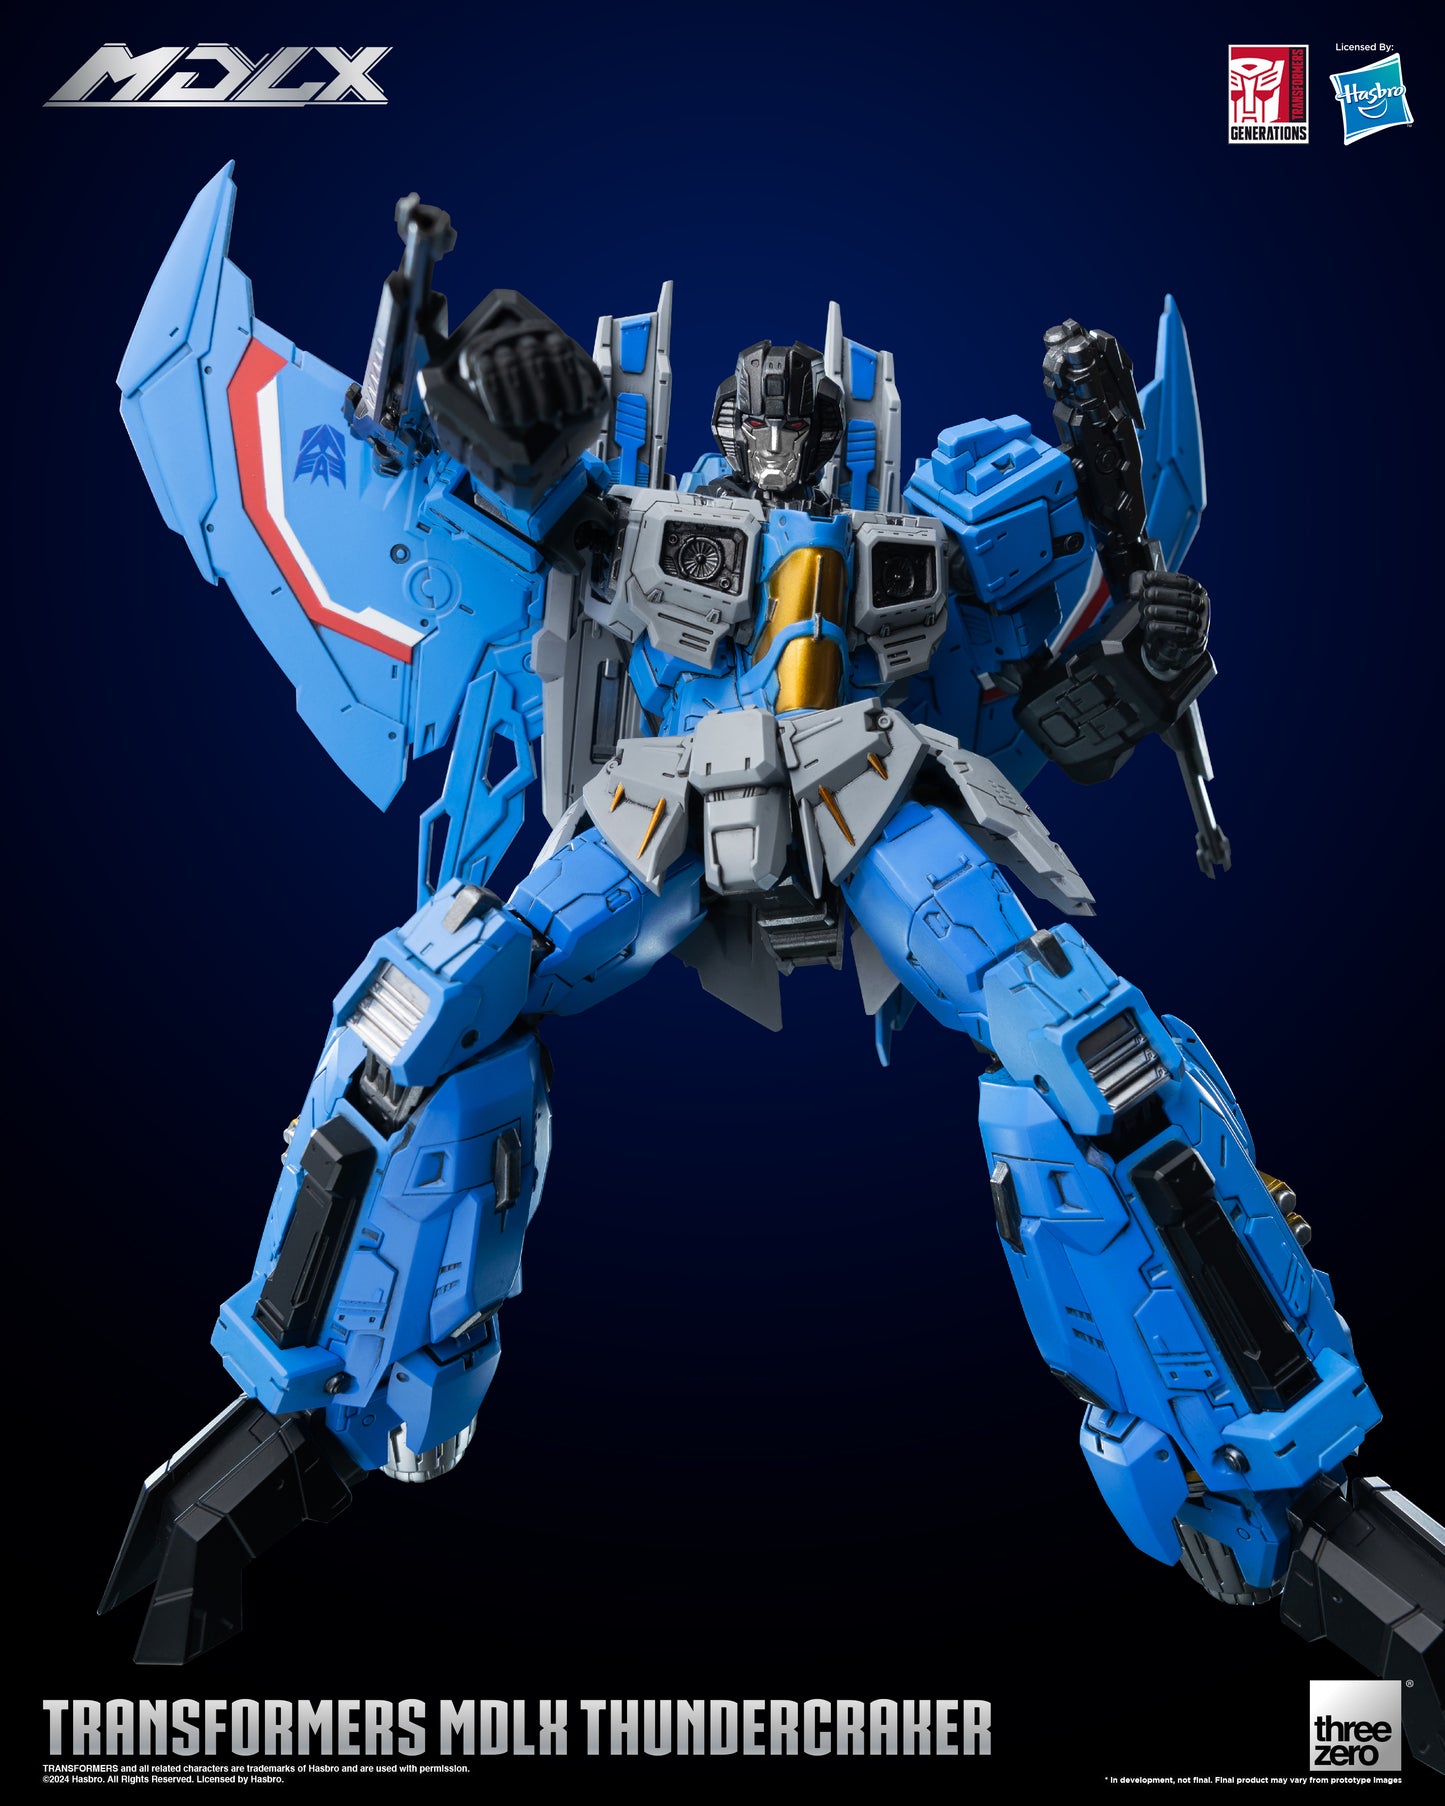 Transformers MDLX Articulated Figure Series Thundercracker shooting pose